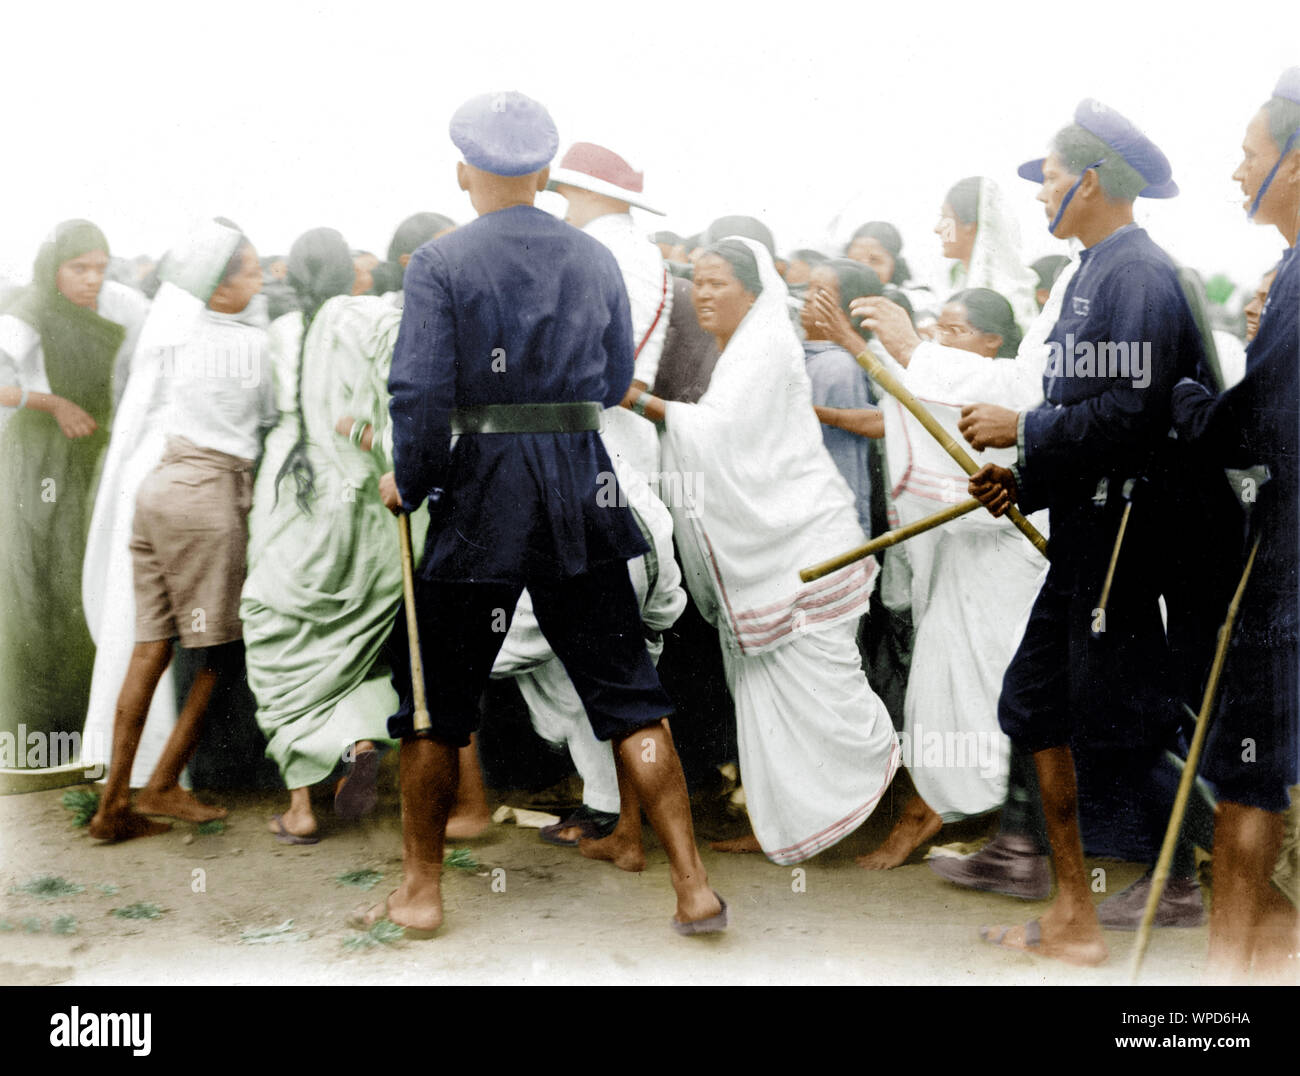 Policemen controlling demonstrators during the Salt Satyagraha, Bombay, India, 1930, old vintage 1900s picture Stock Photo